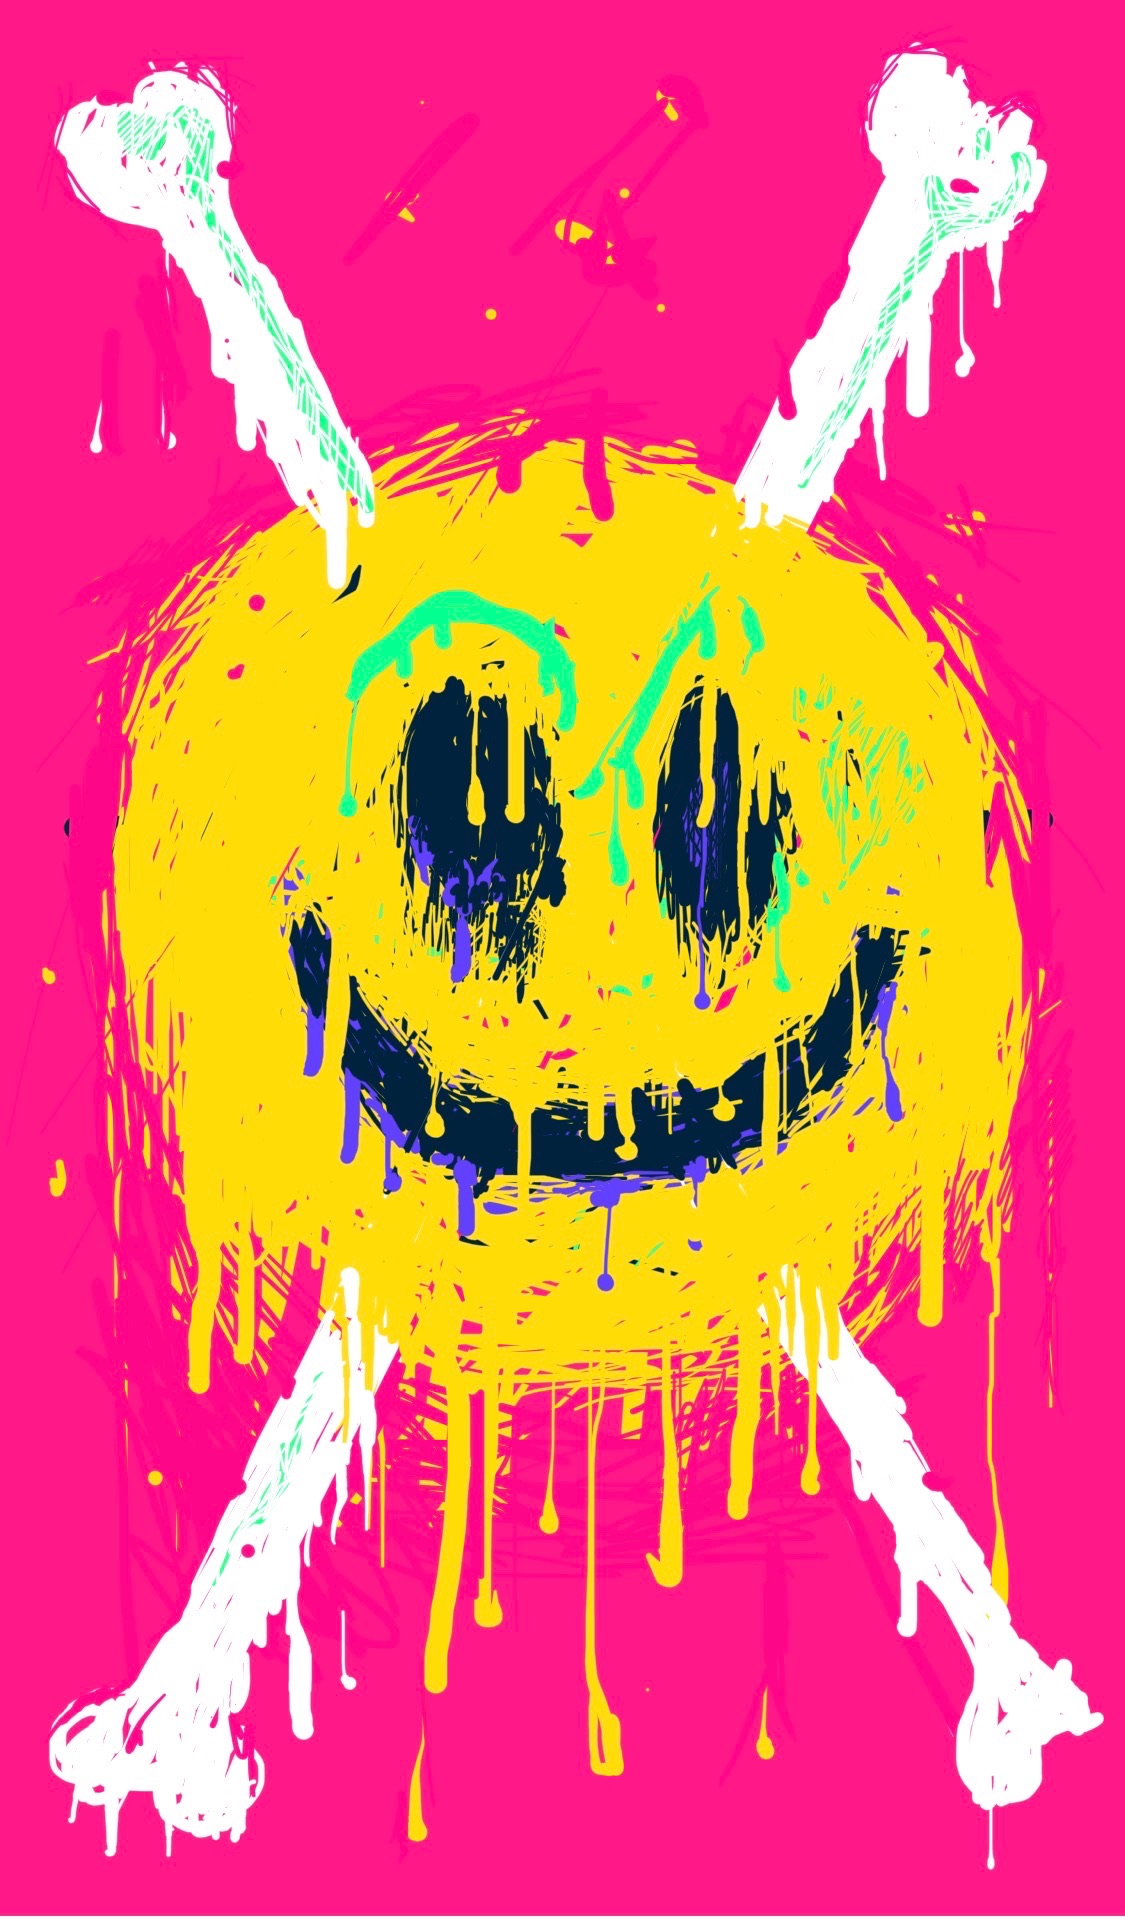 A drippy painting of a smiley face with crossbones, like a pirate symbol